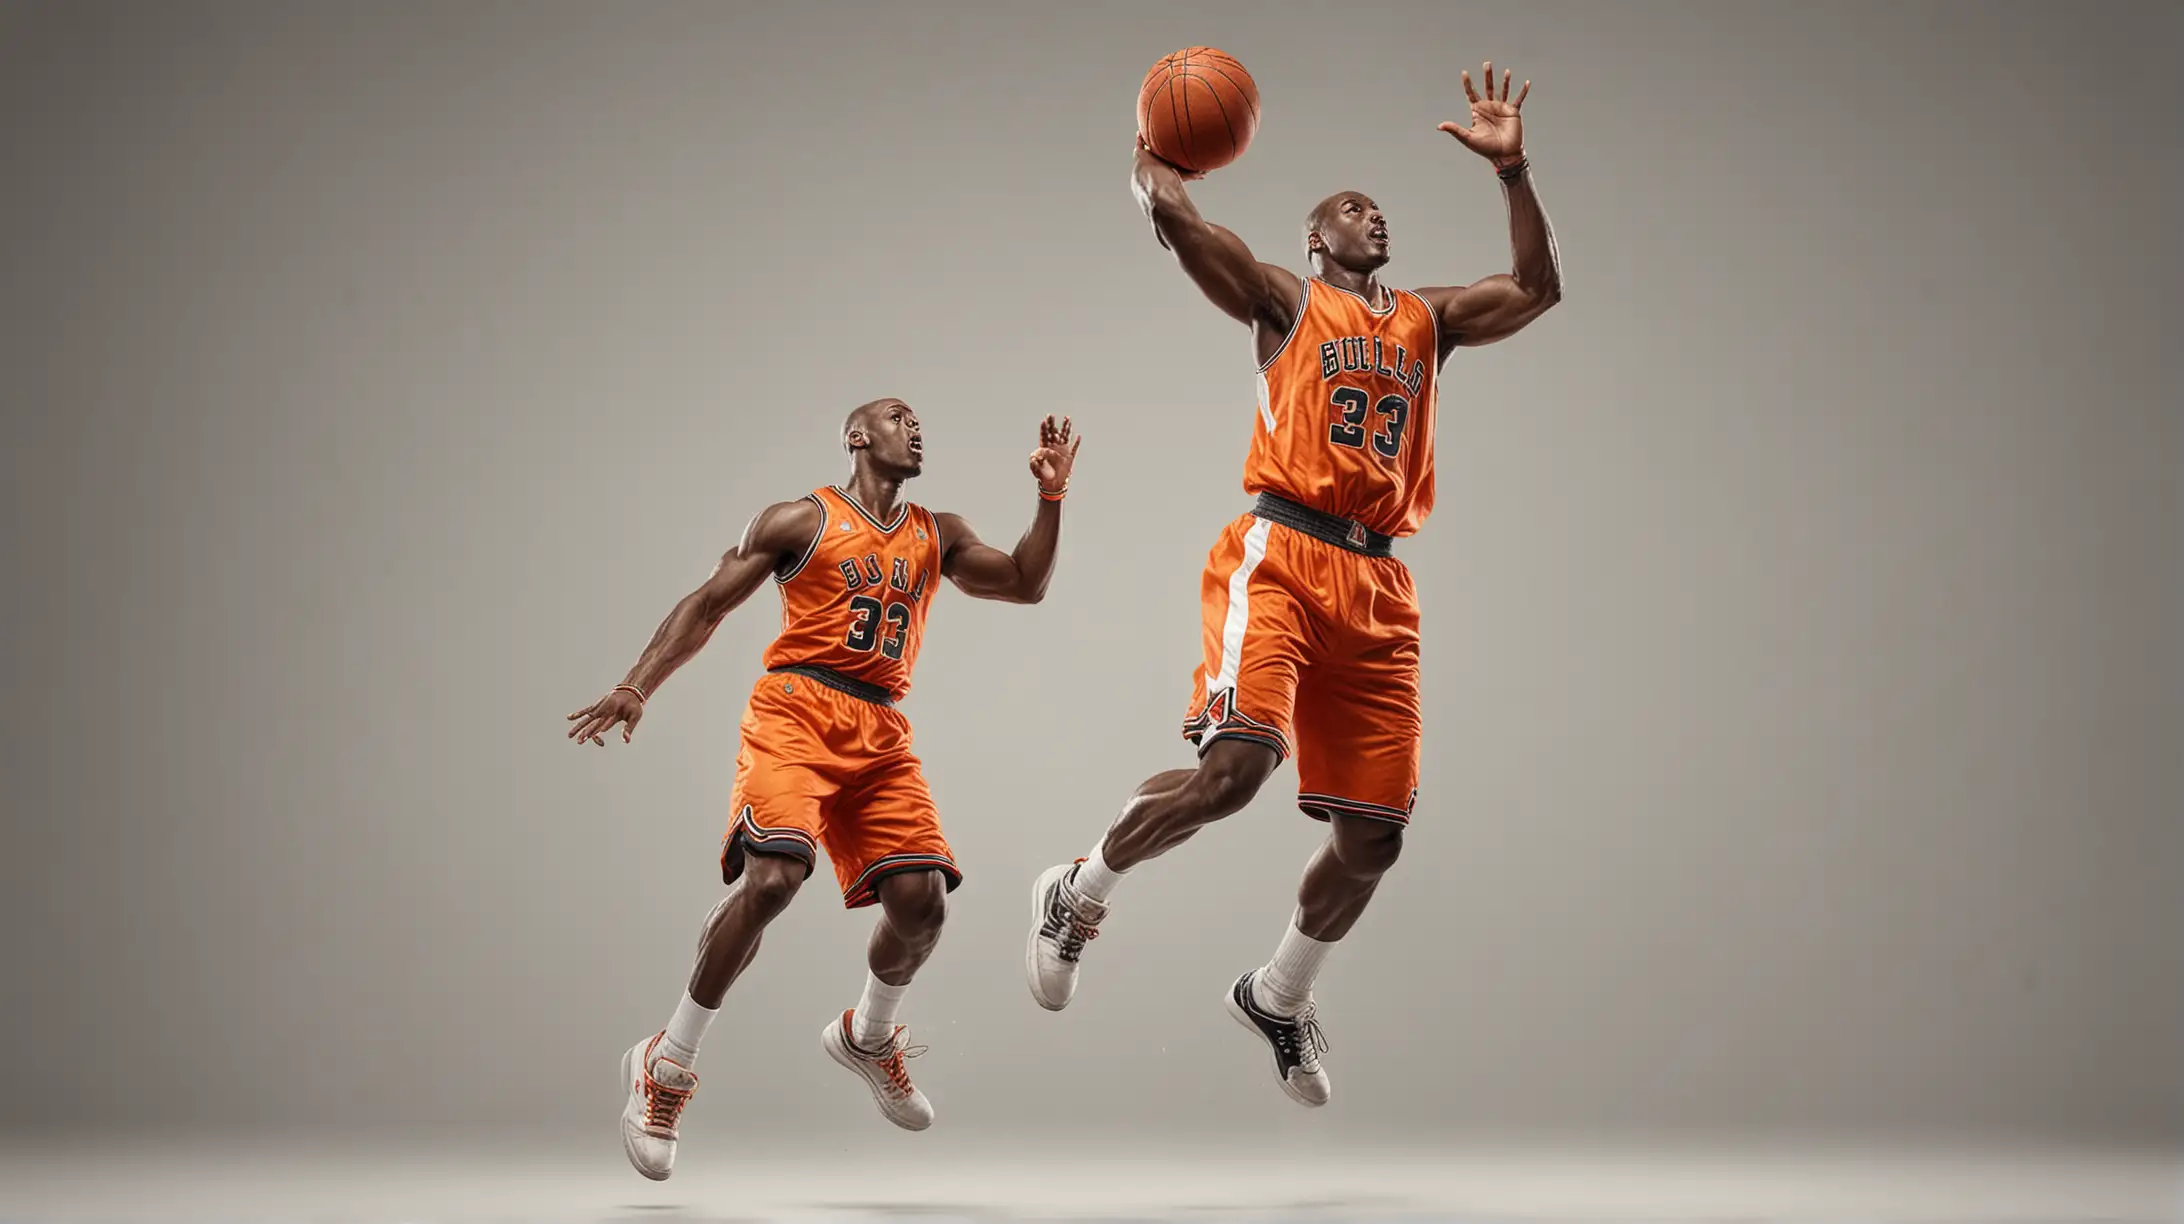 Dynamic Basketball Player Jumping with Ball in Orange Uniform